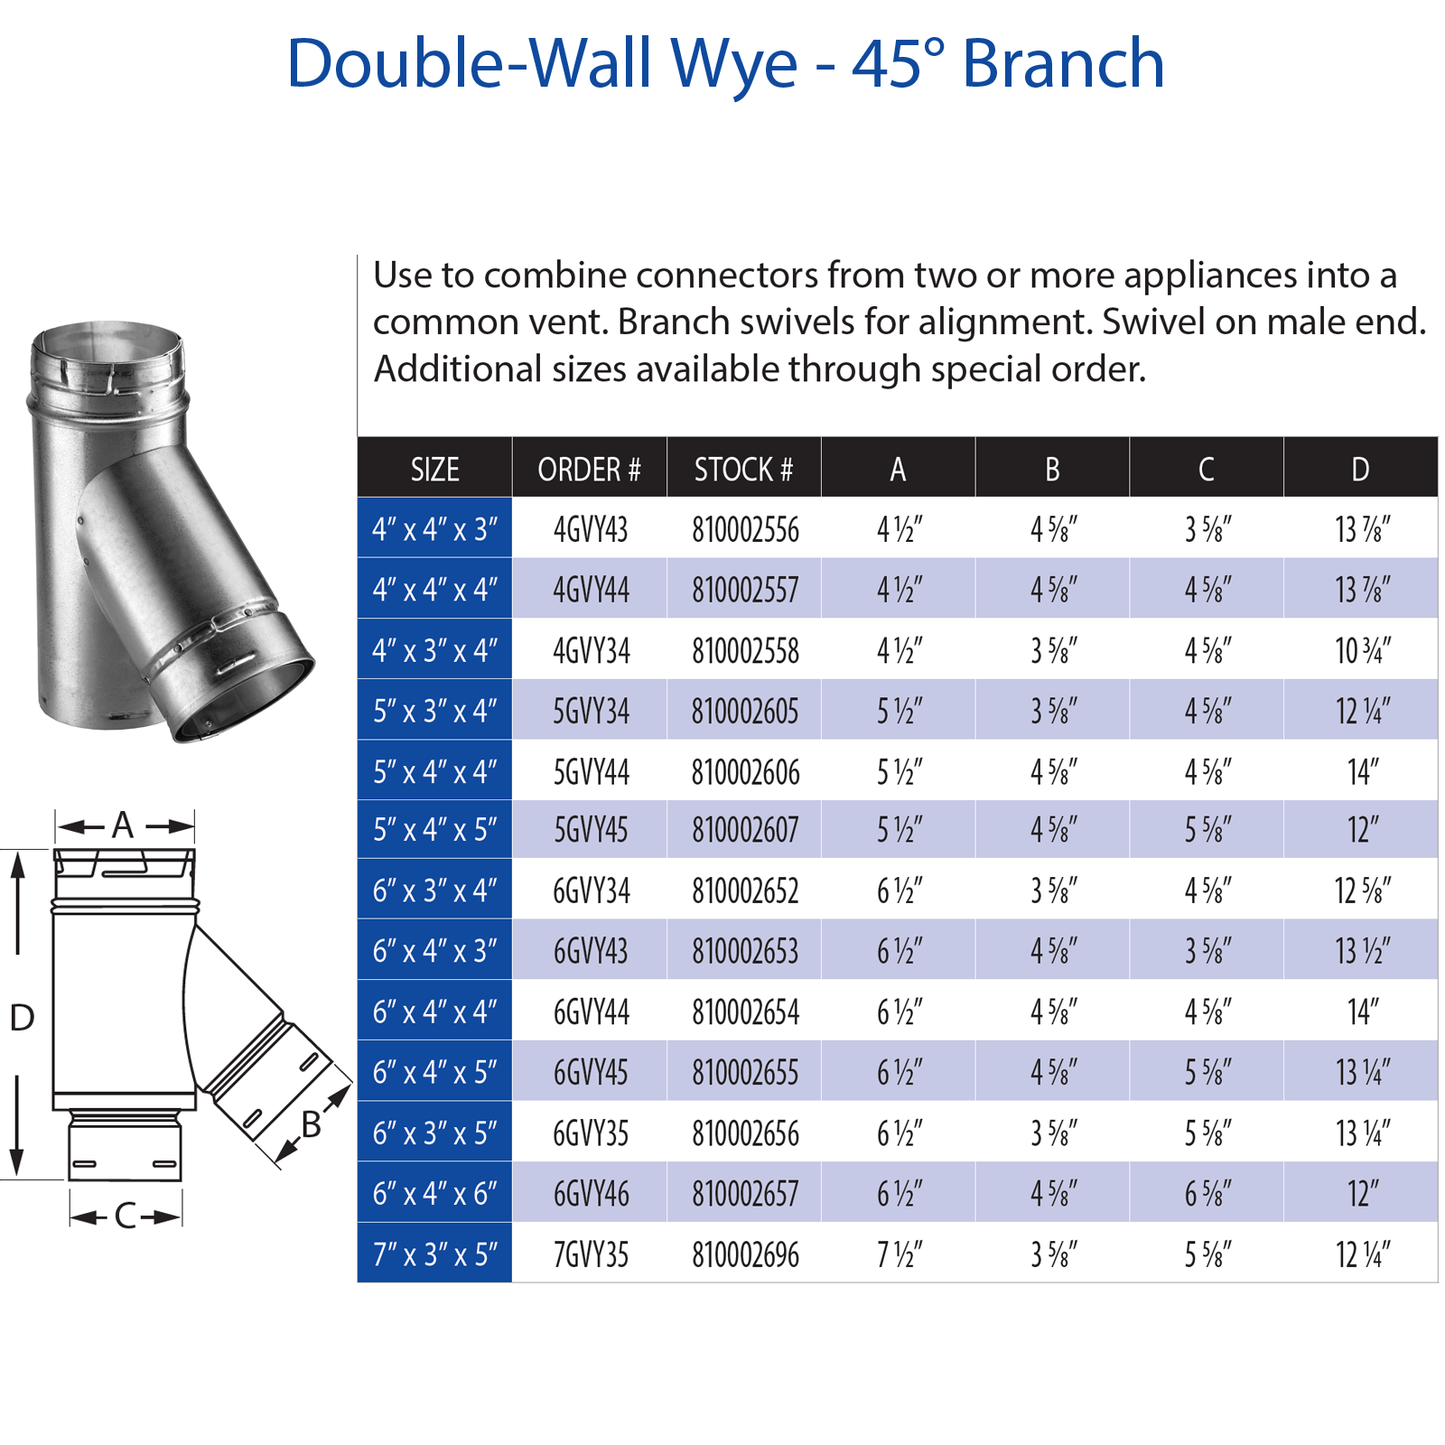 DuraVent Type B 7" x 3" x 5" Double-Wall WYE - 45 Degree Br | 7GVY35